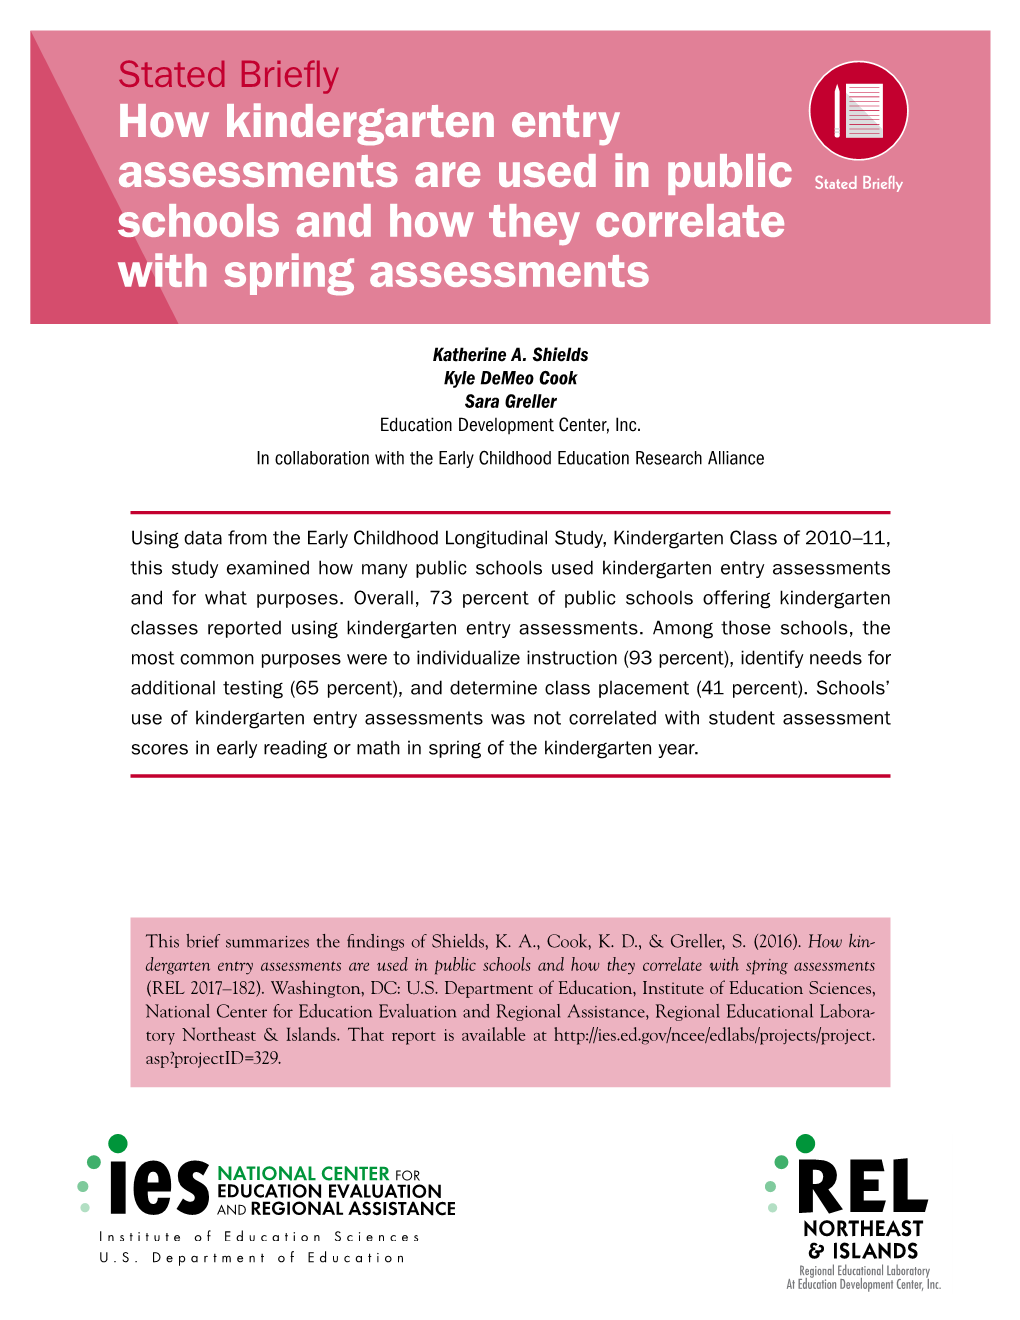 How Kindergarten Entry Assessments Are Used in Public Schools and How They Correlate with Spring Assessments (REL 2017–183)